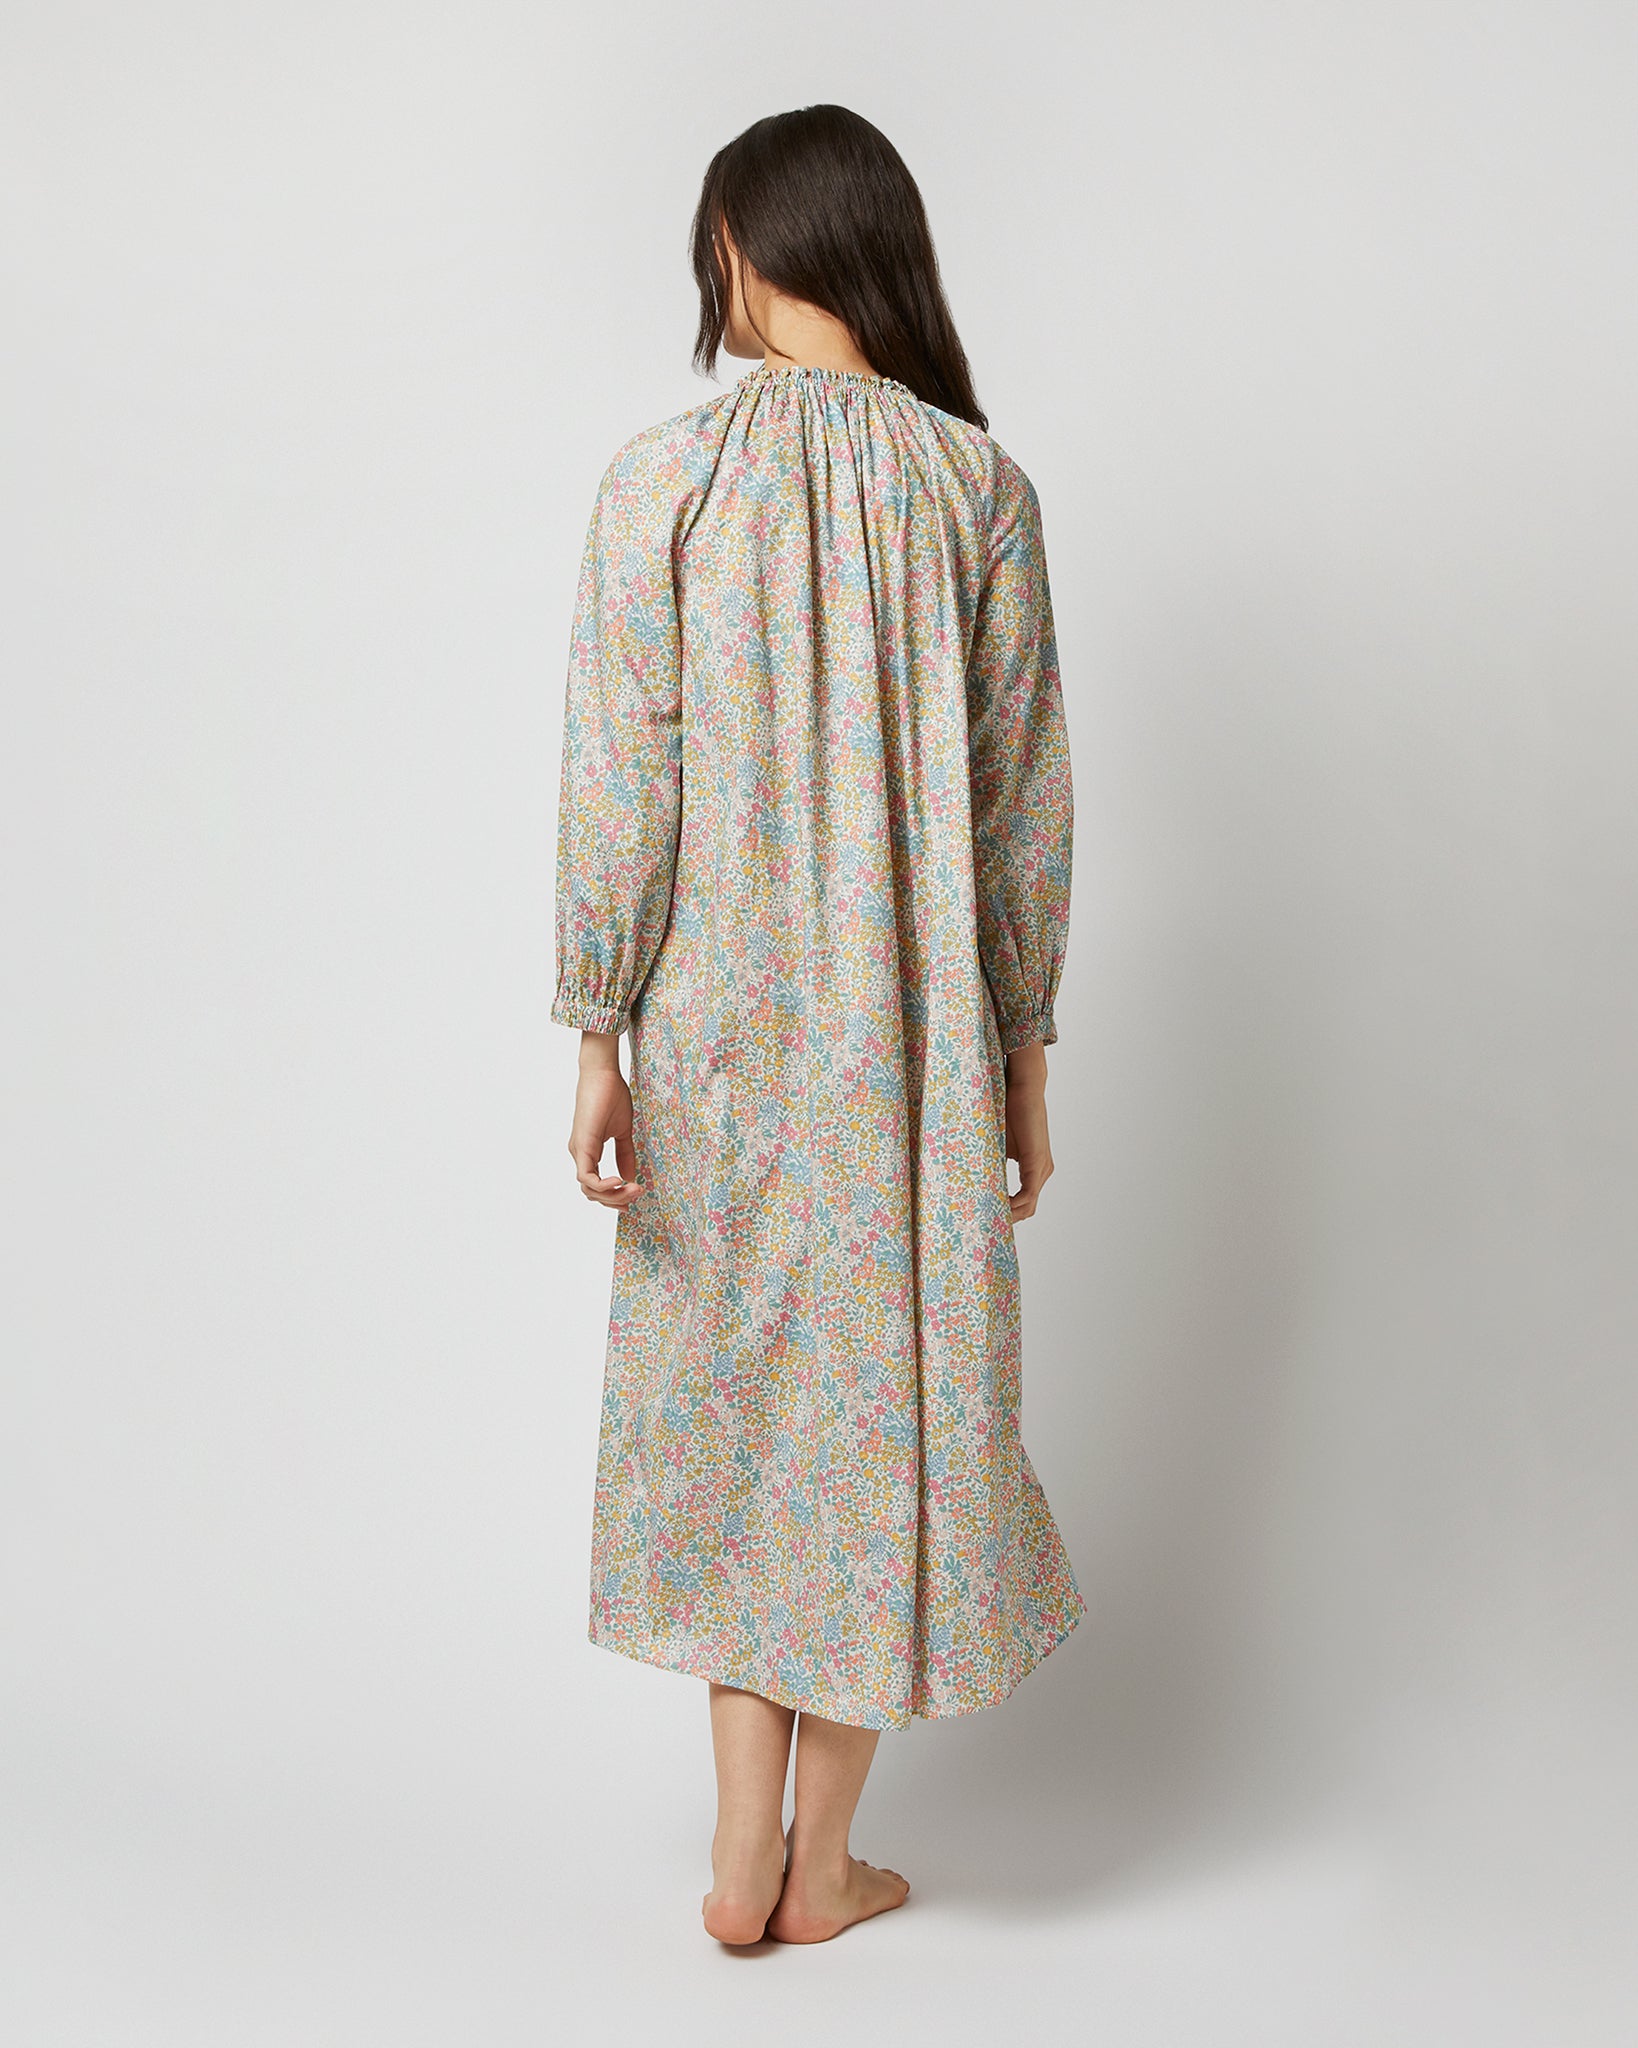 Long-Sleeved Lucy Nightdress in Pale Yellow/Orange/Blue Joanna Louise Liberty Fabric